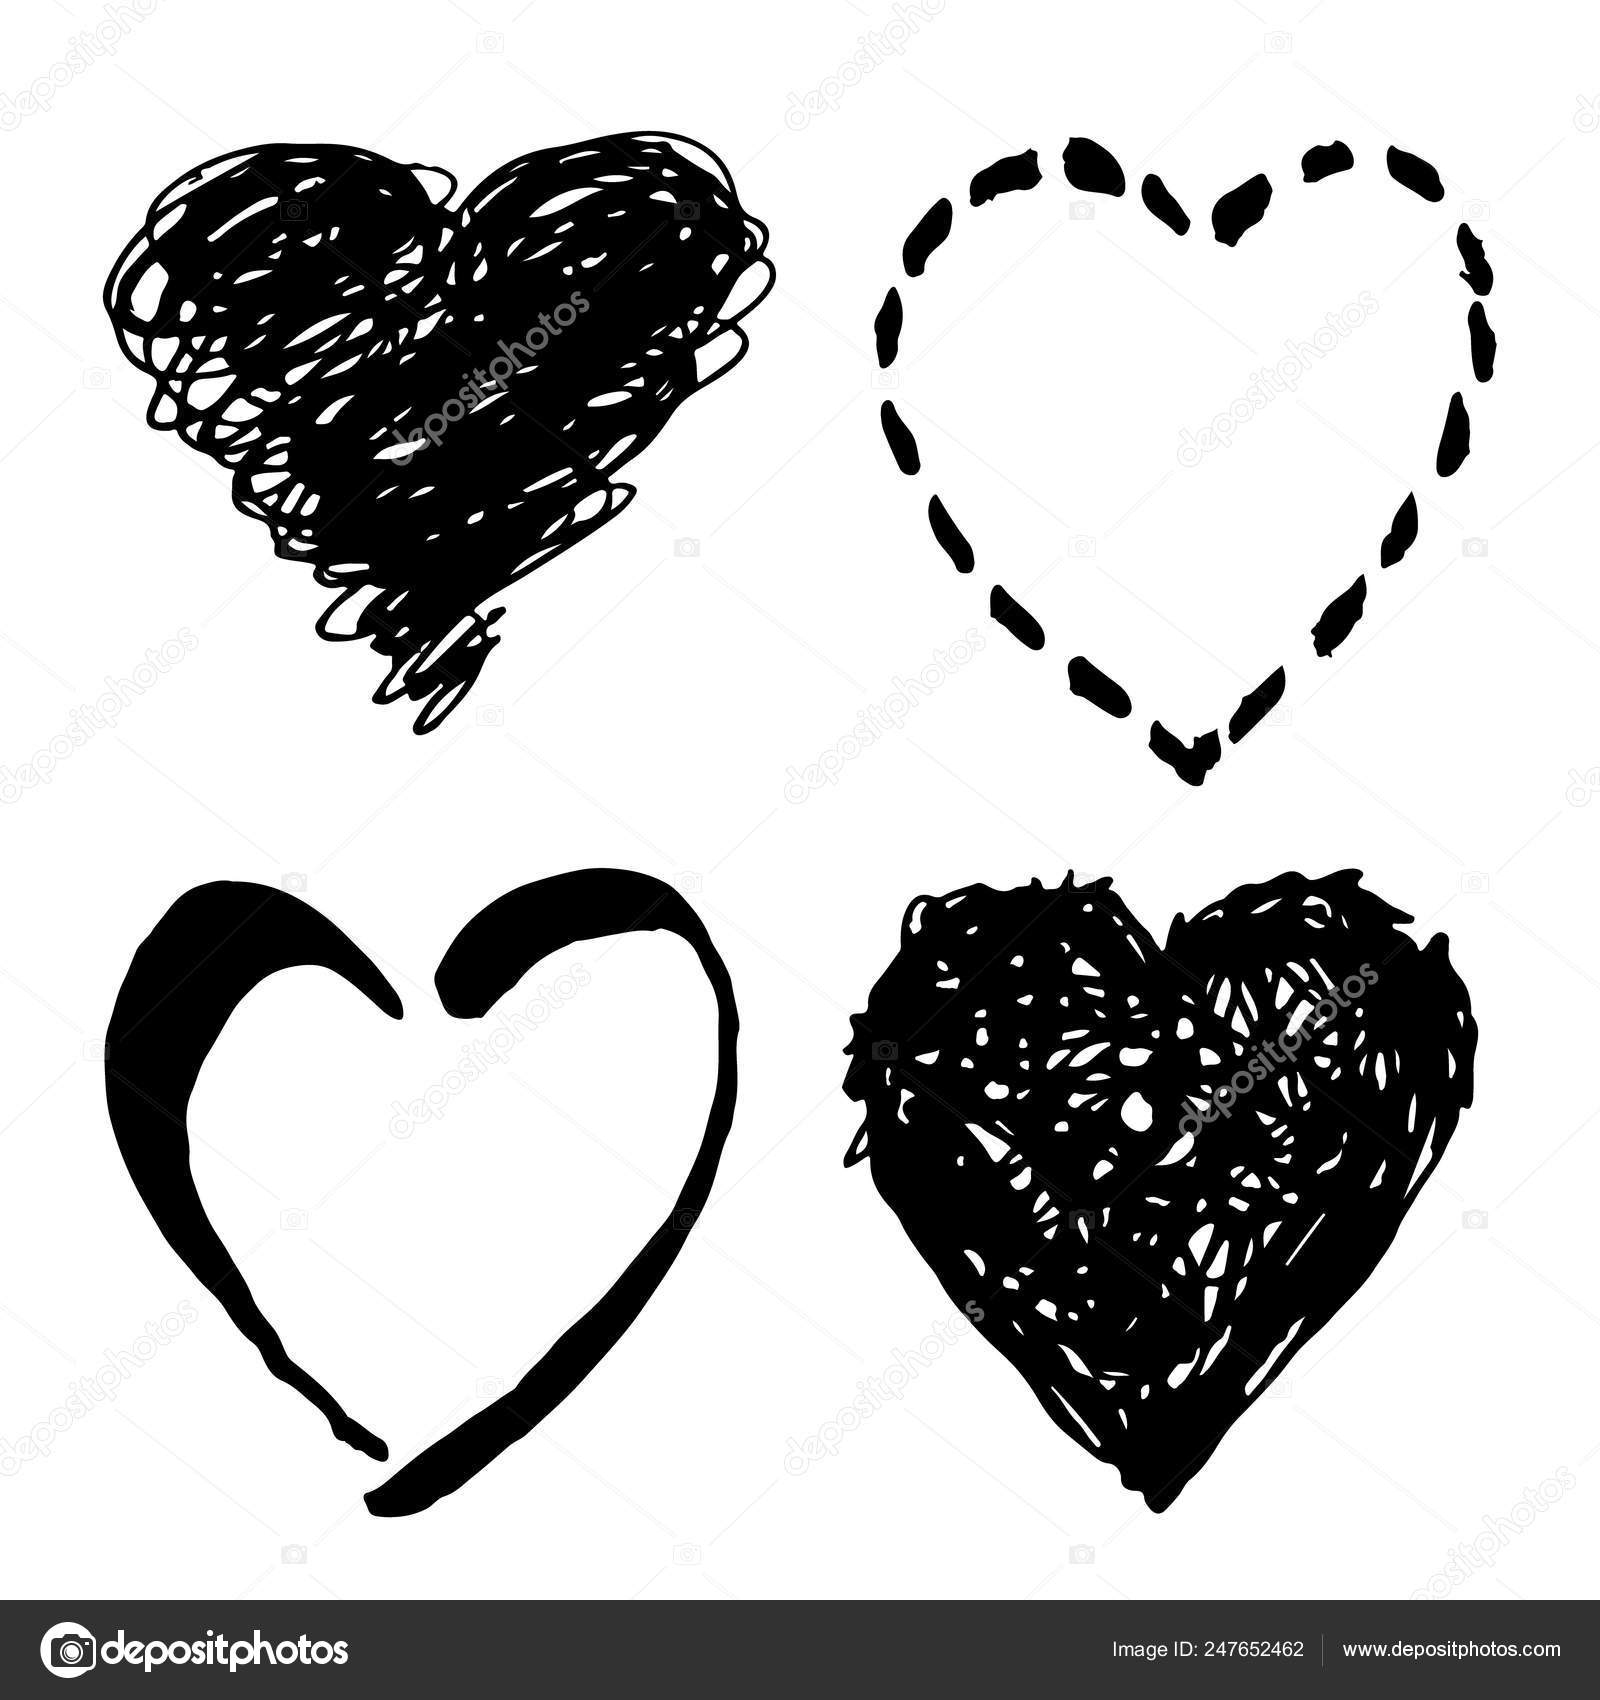 Doodle Hand Drawn Heart Shaped On White Background